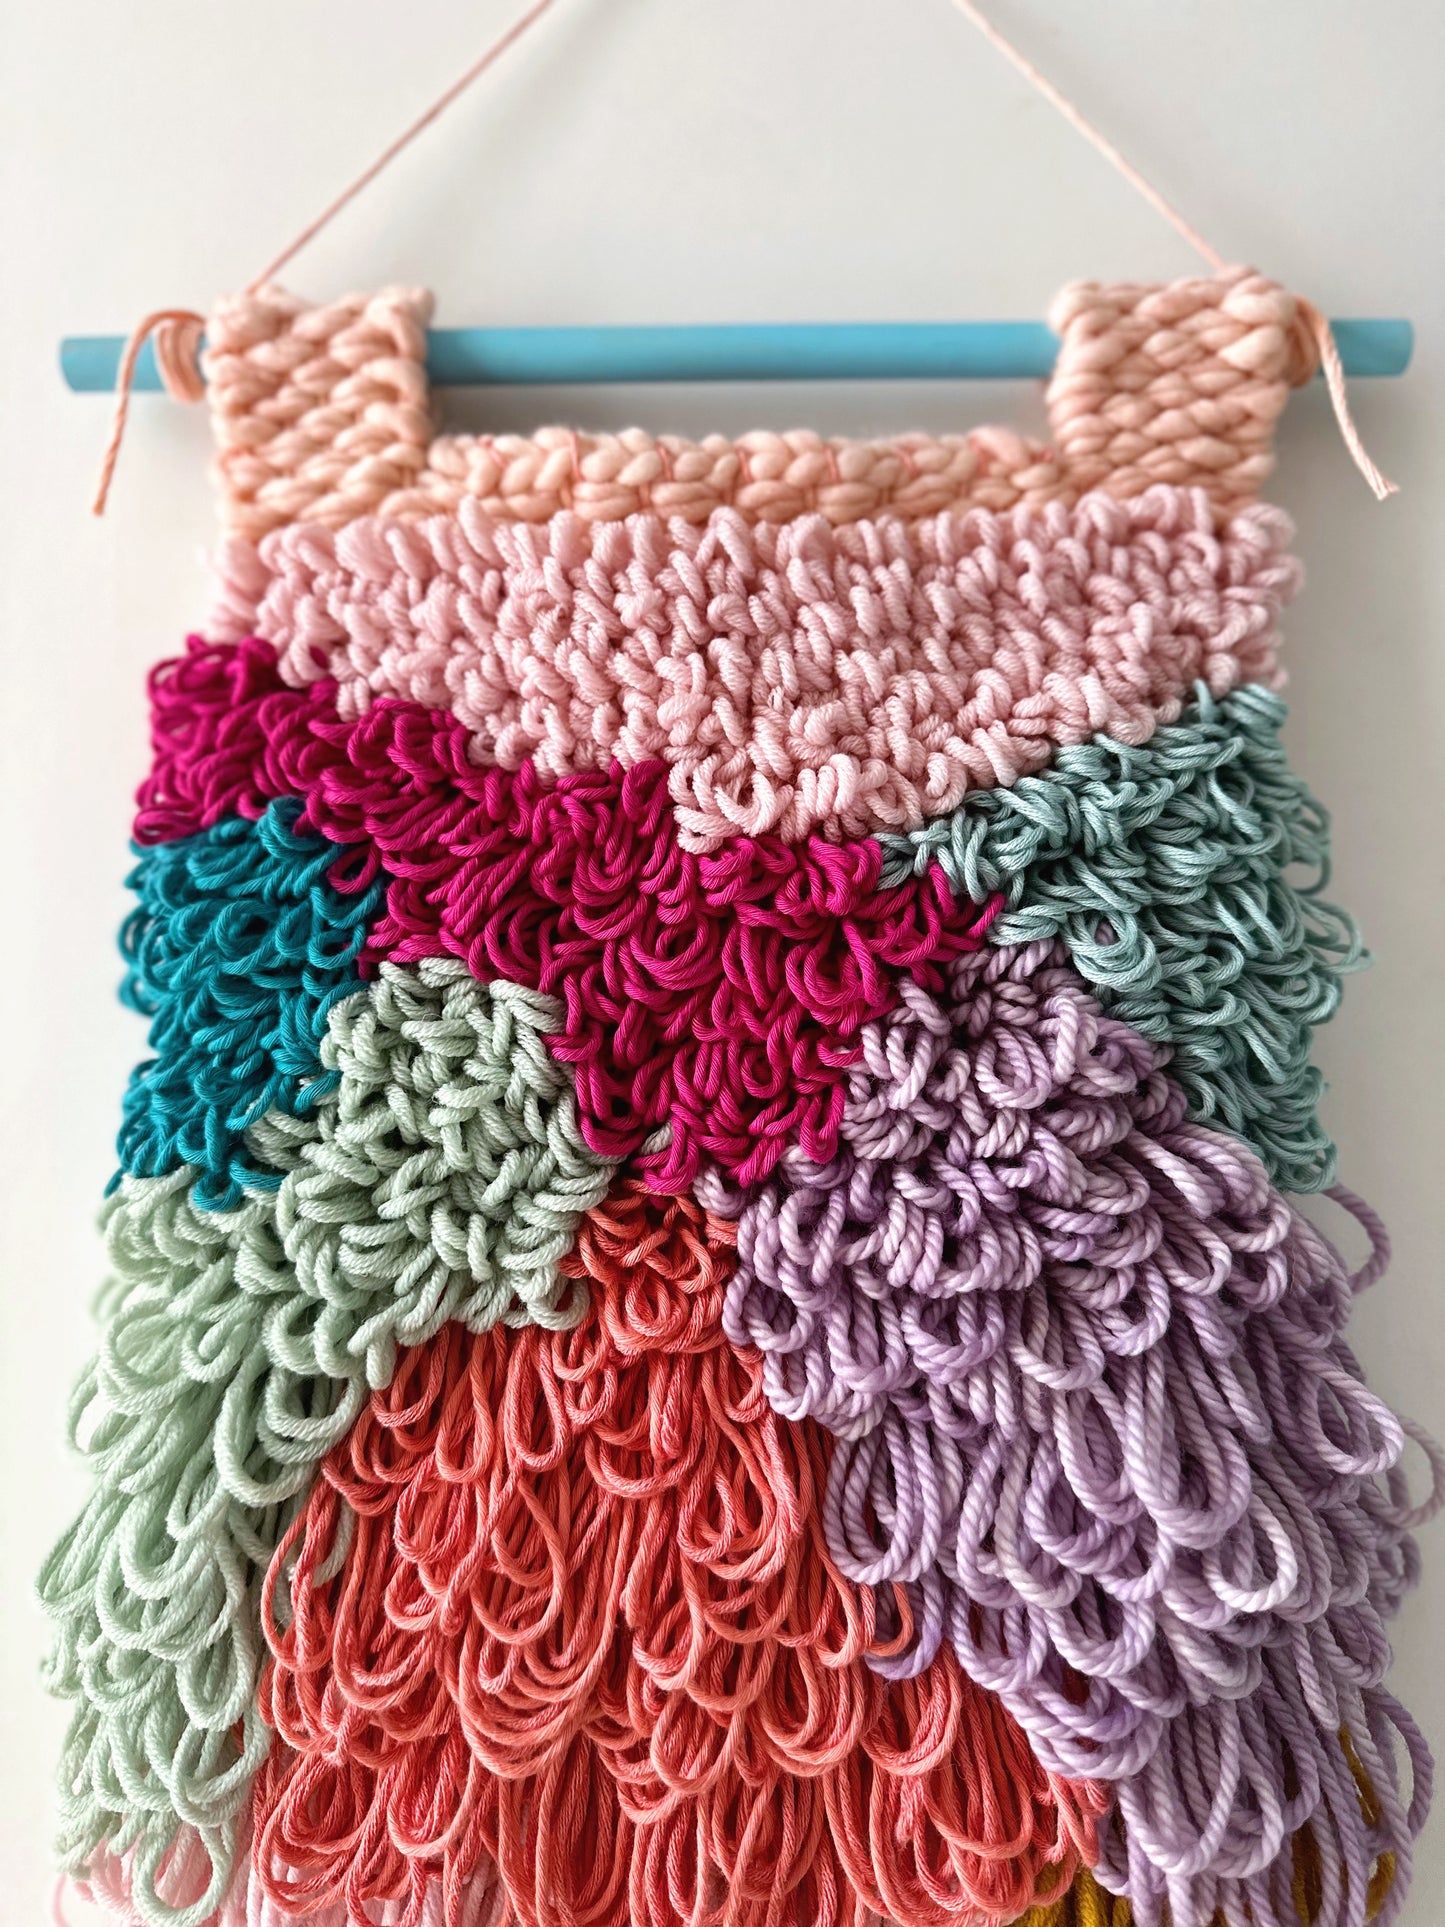 Lots of Loops- Woven wall hanging